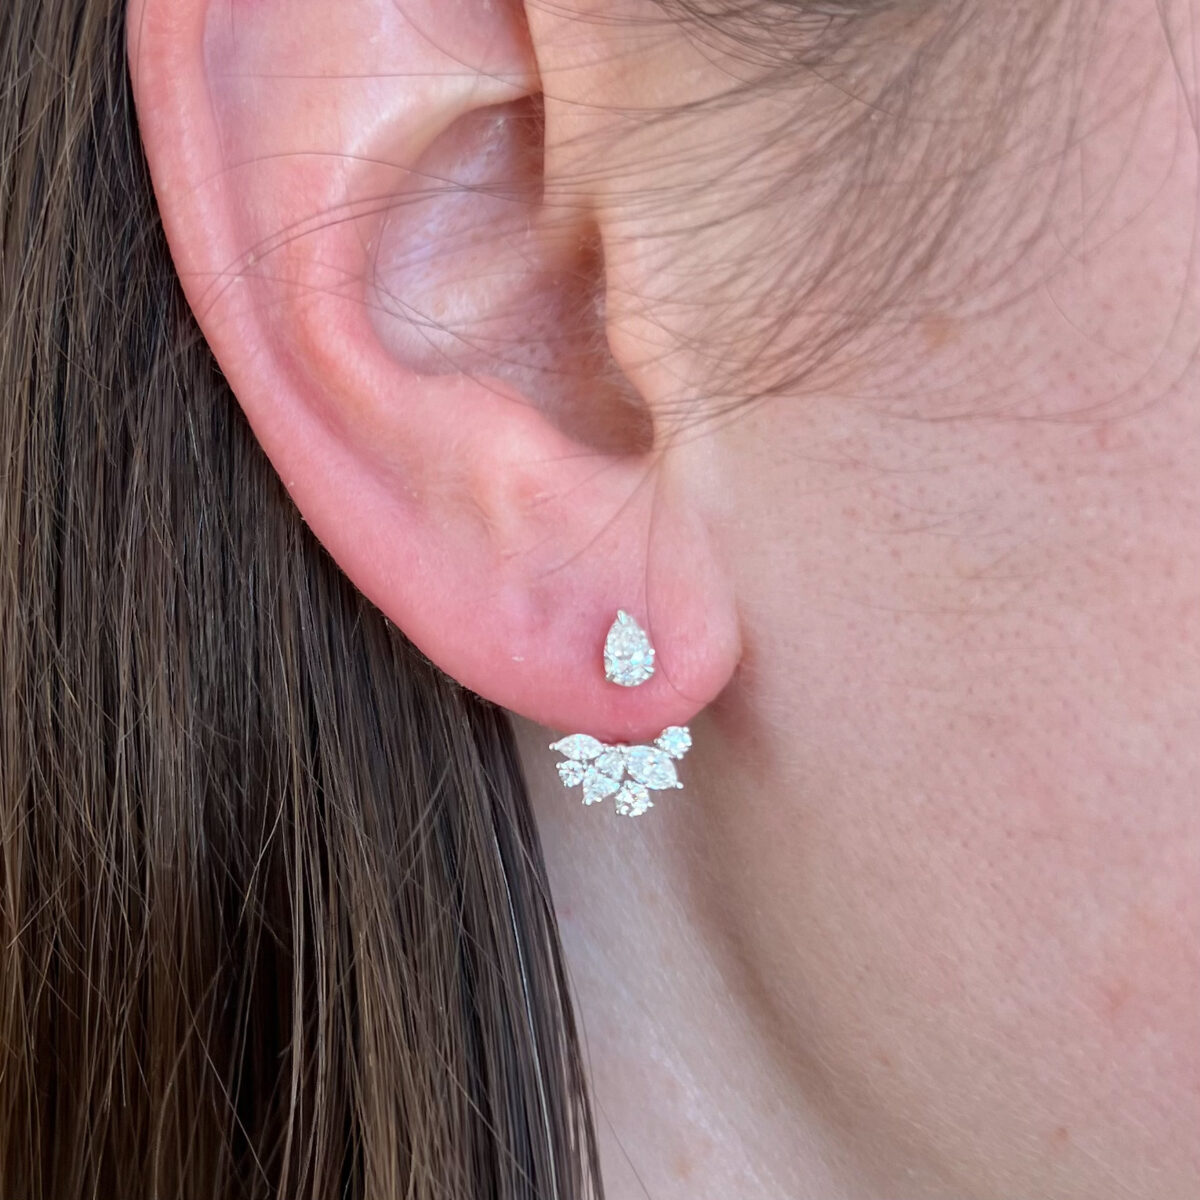 White Gold Diamond Cluster Studs with Jackets